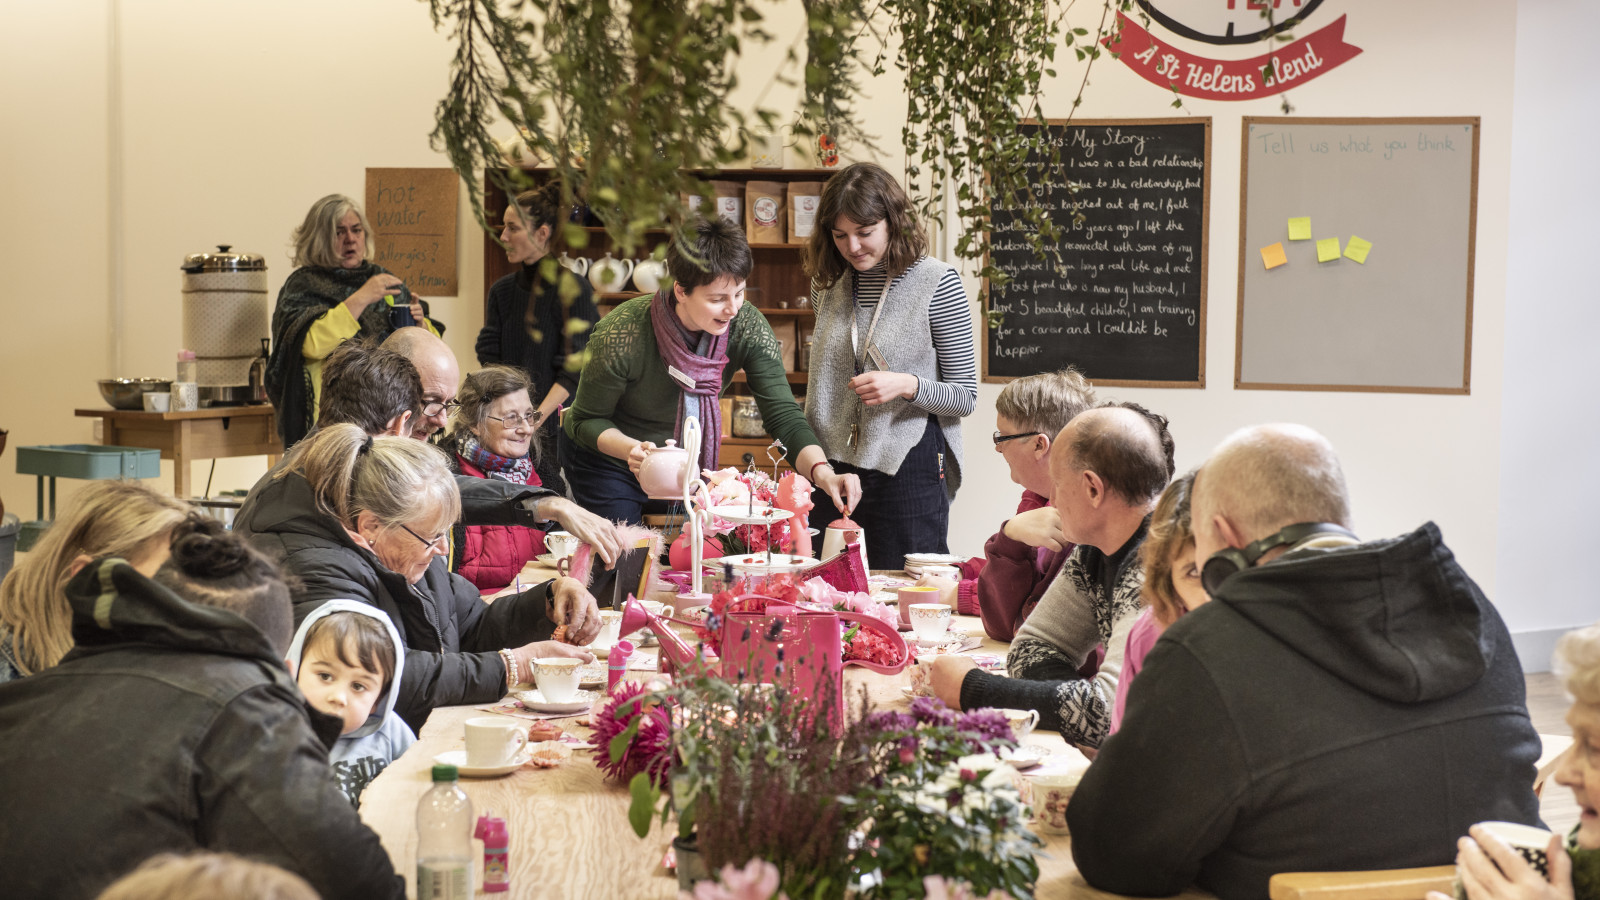 People sit around a long table in a light filled room. The people are of all ages from a young child to older people. The table is covered in flowers and everyone has a cup and saucer in front of them. Two women stand at the end of the table serving cups of tea and are smiling.